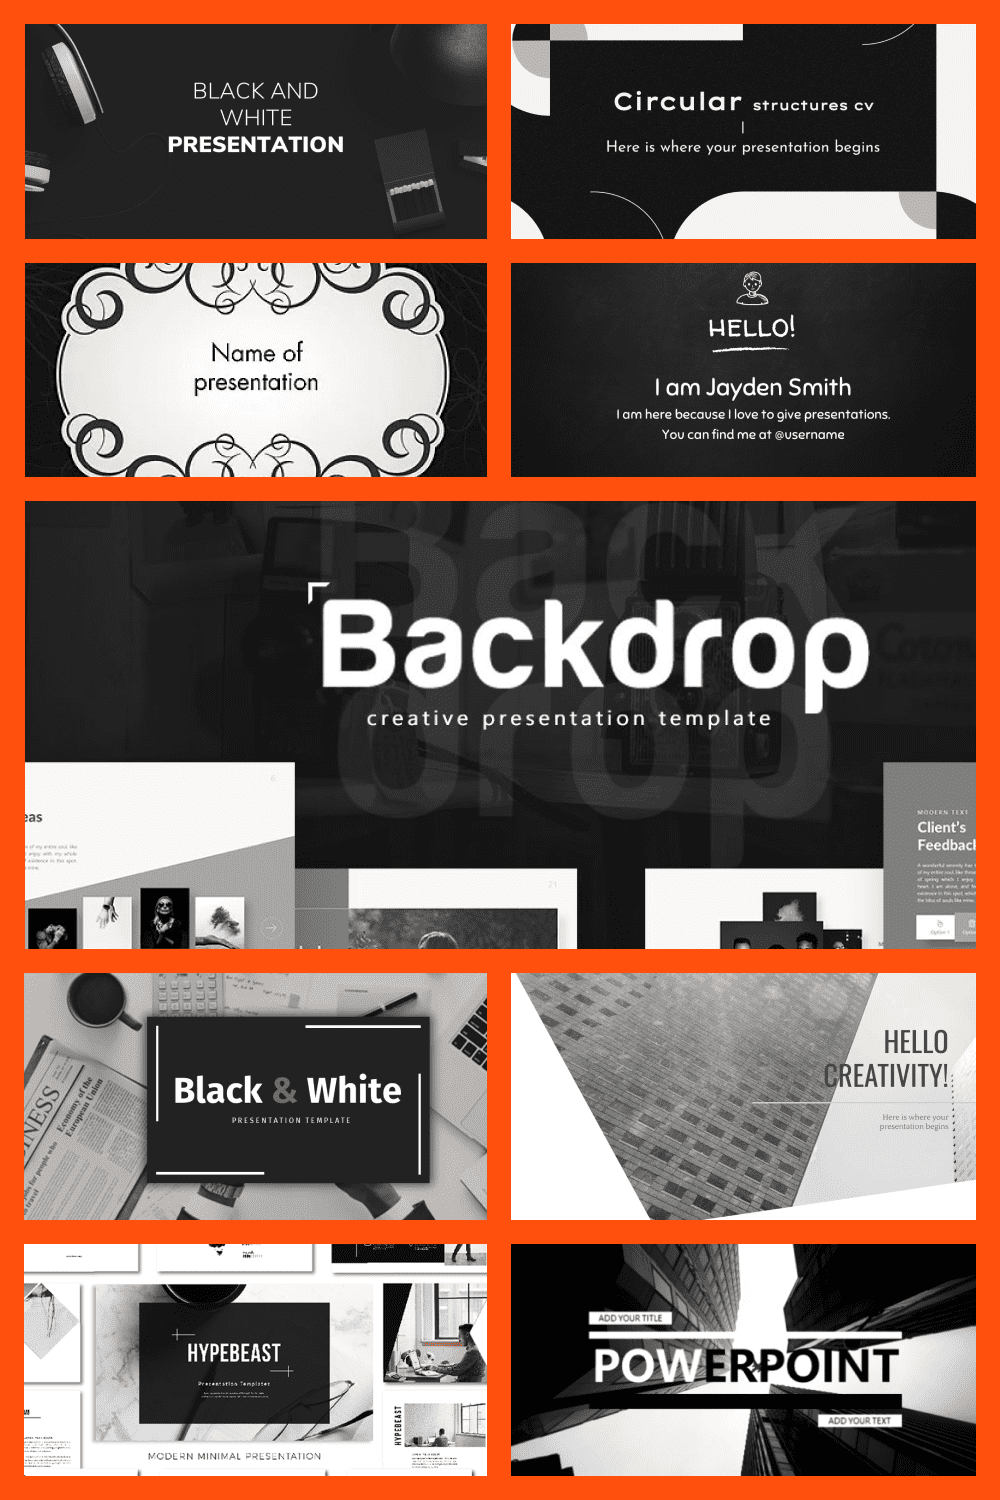 Best Black and White Powerpoint Templates pinterest.